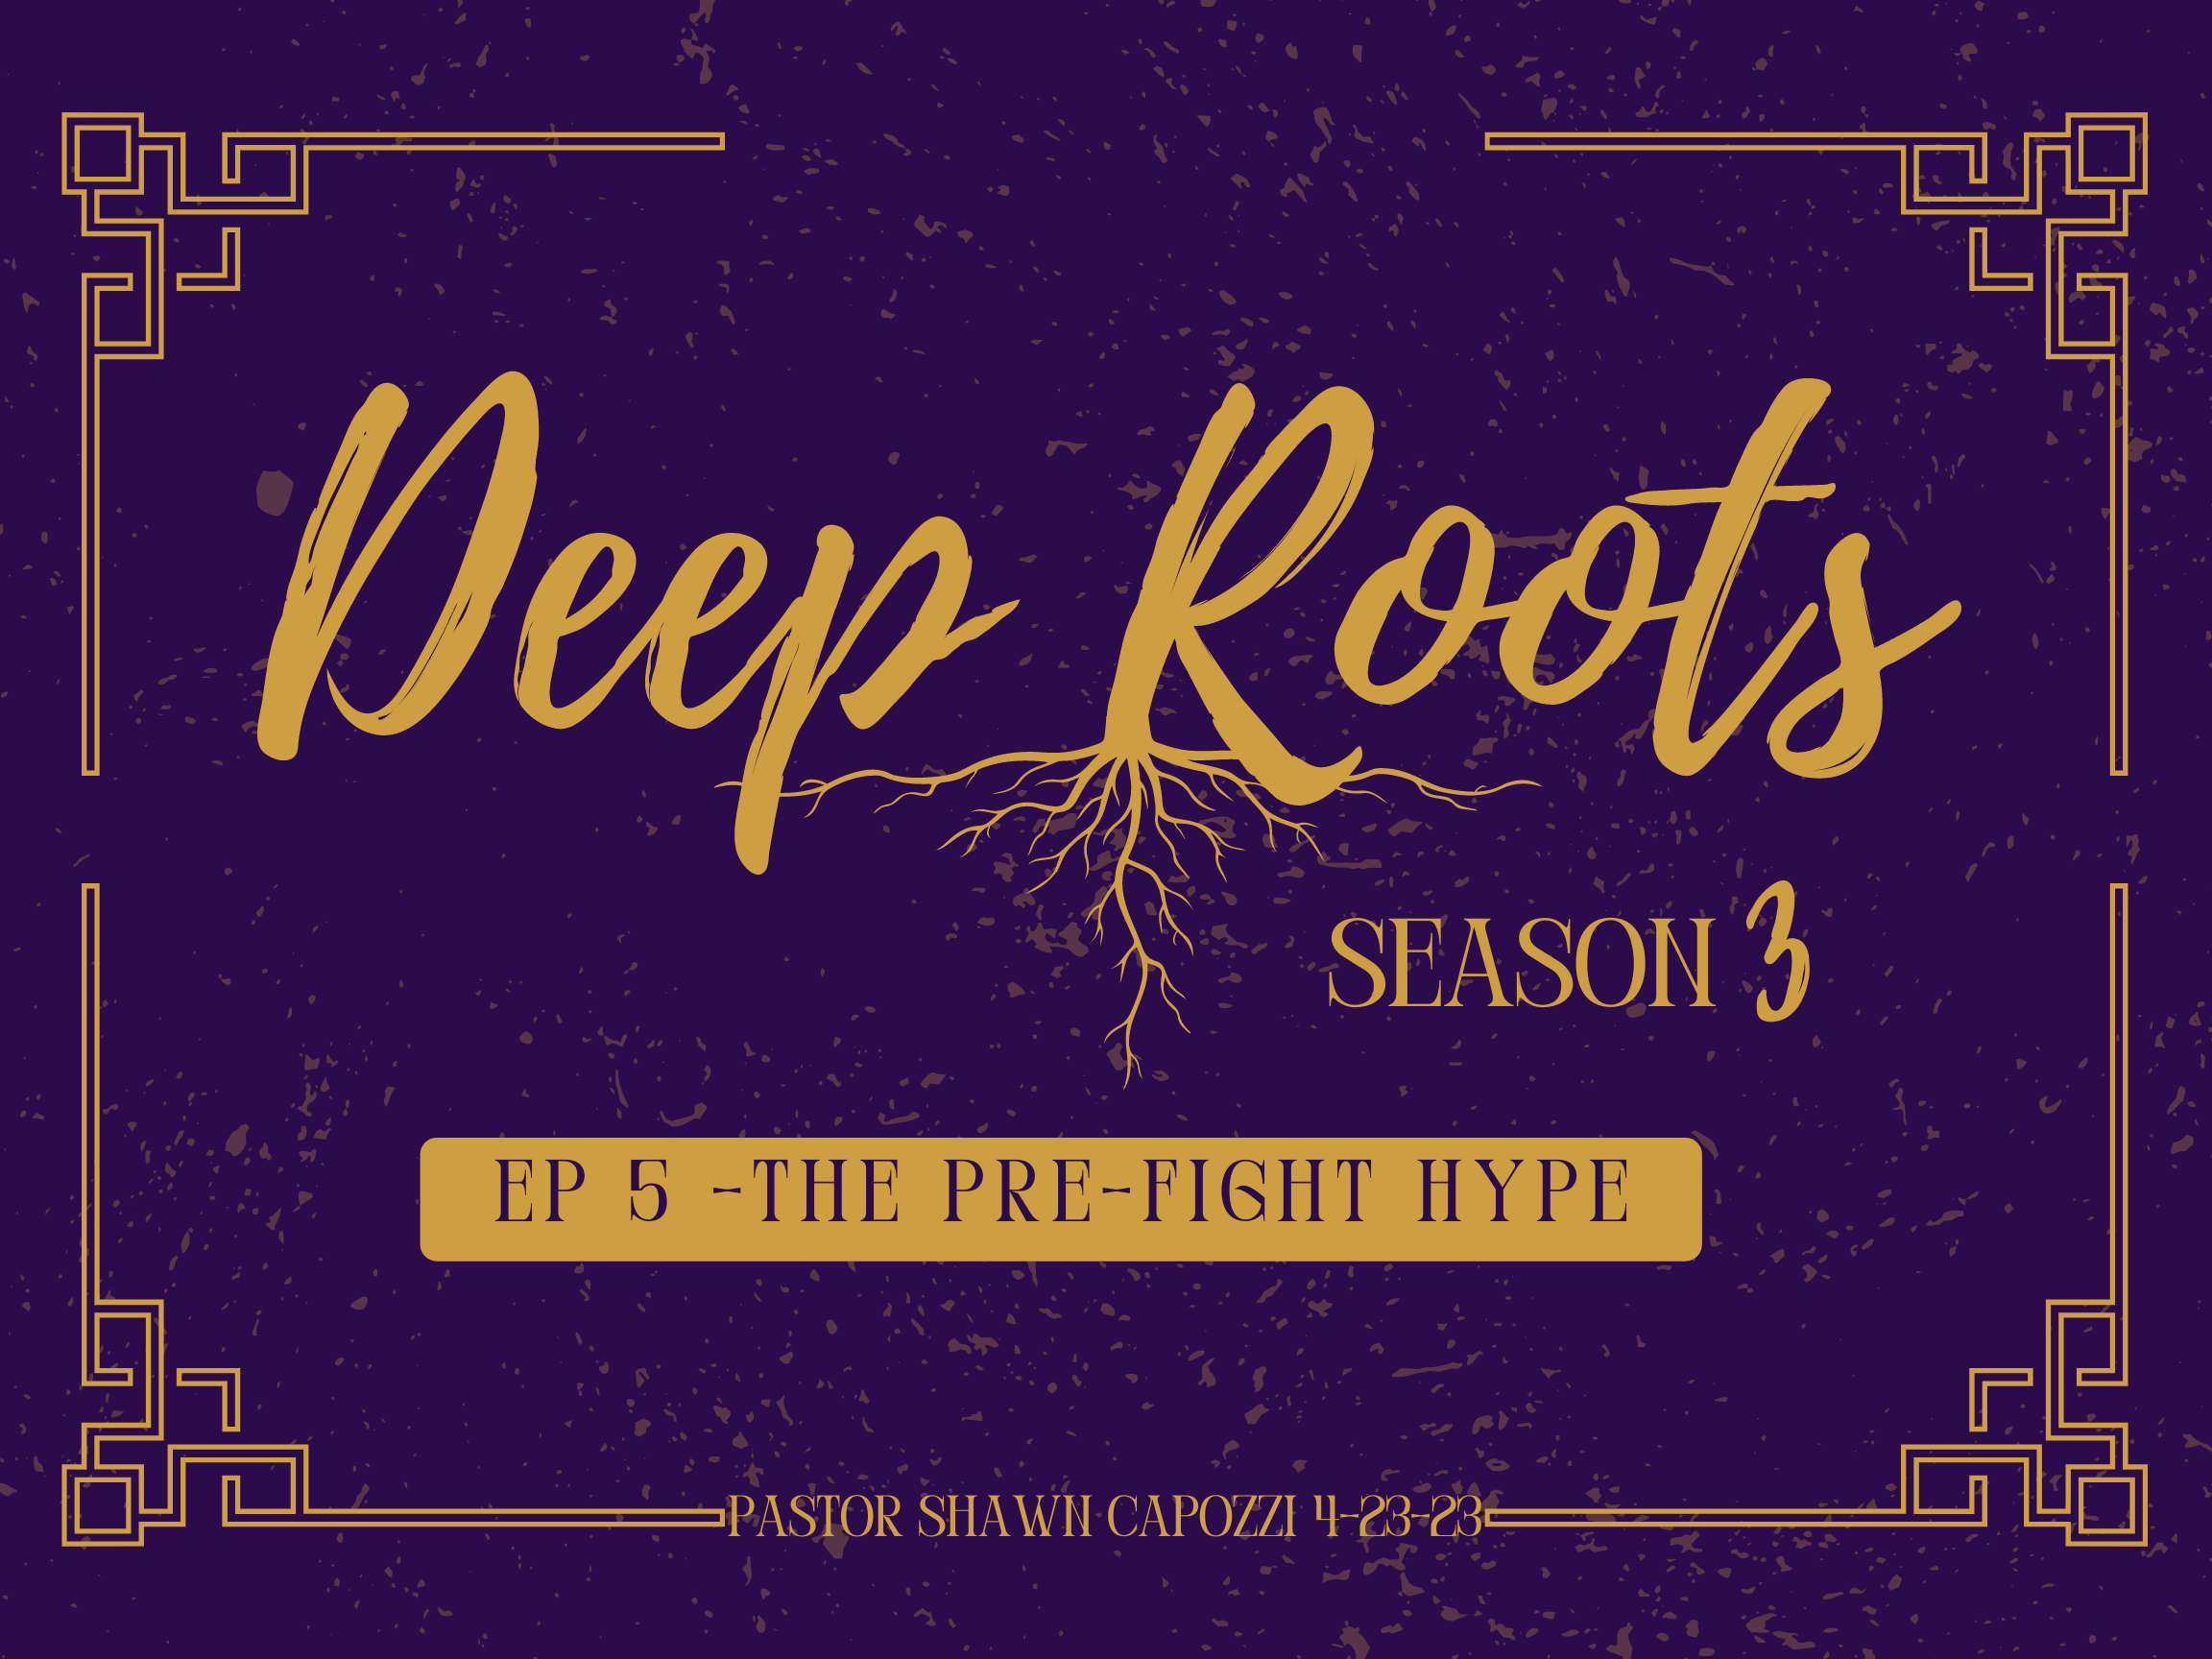 Deep Roots S3E5 Pre-Fight Hype